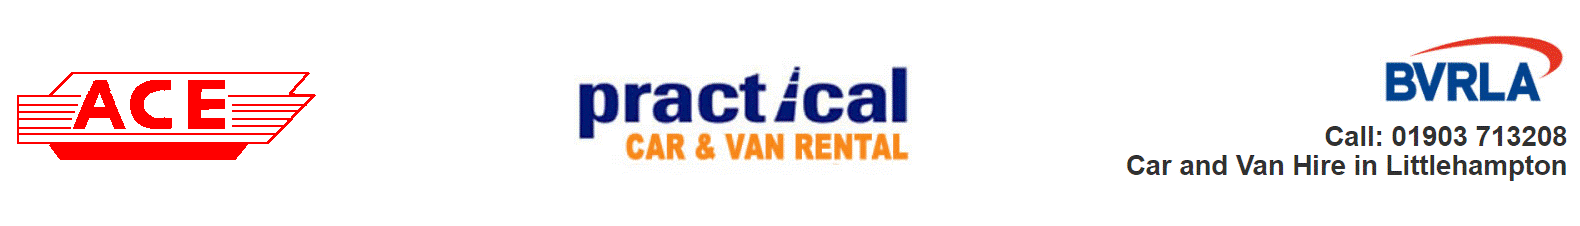 Ace Car Hire and Couriers